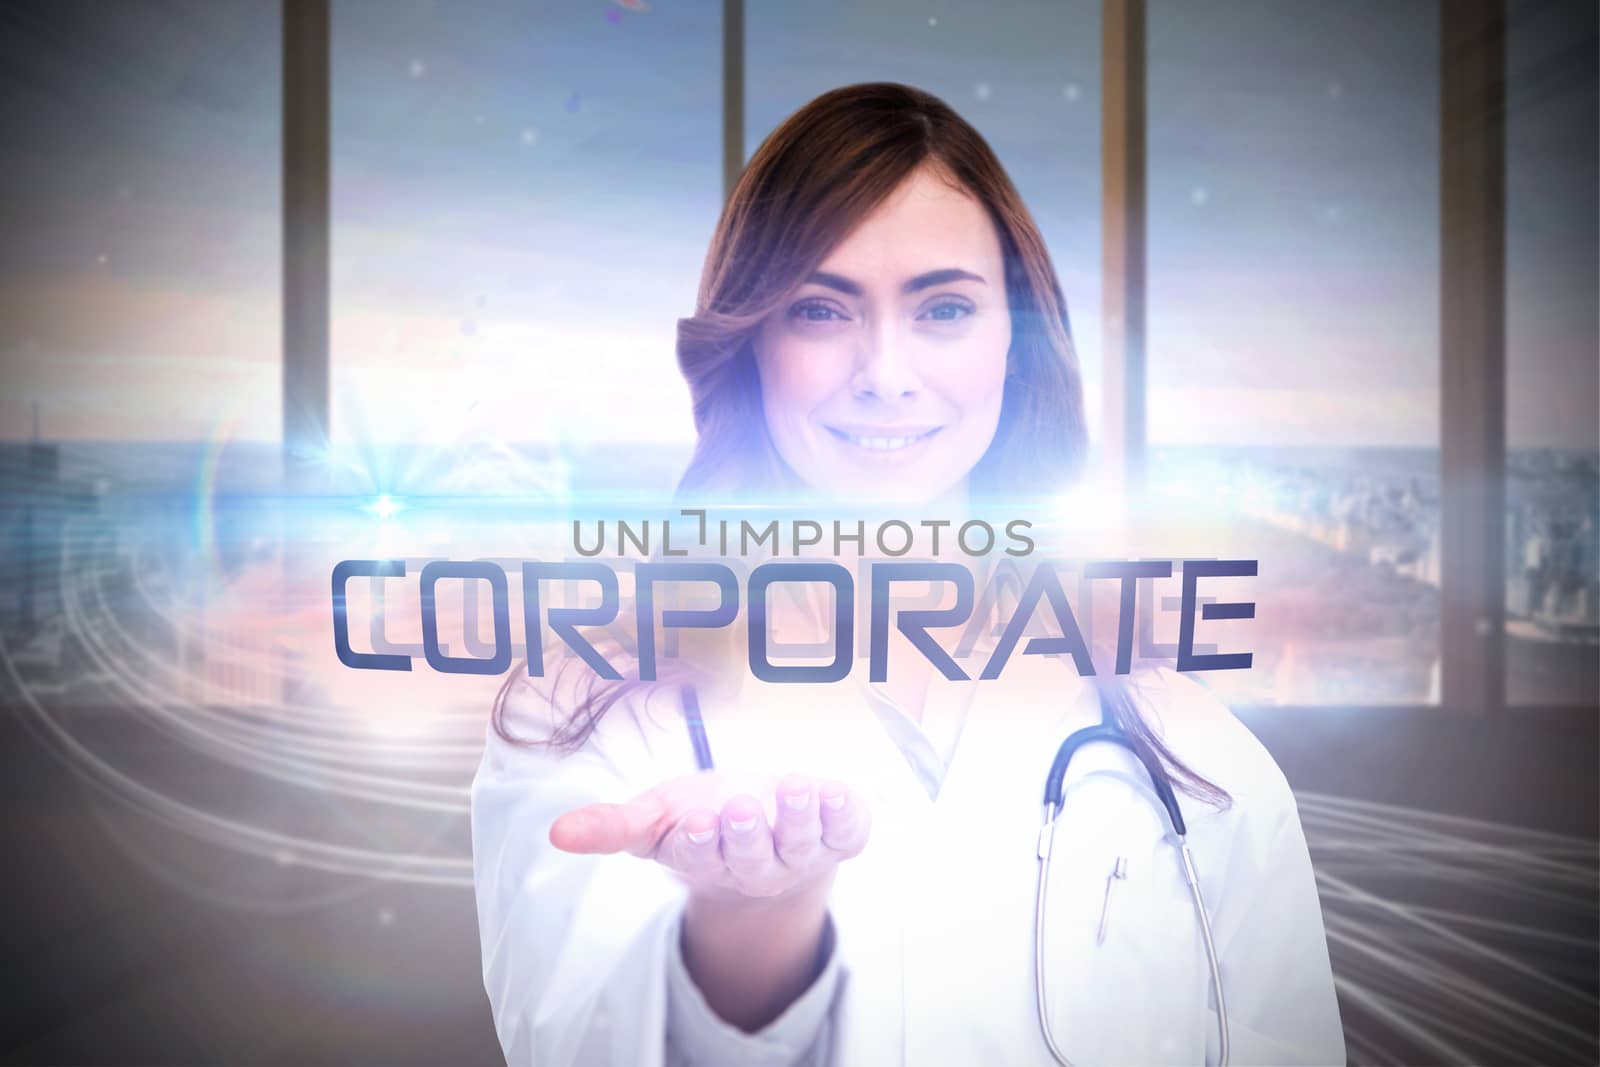 The word corporate and portrait of female nurse holding out open palm against abstract white line design in room